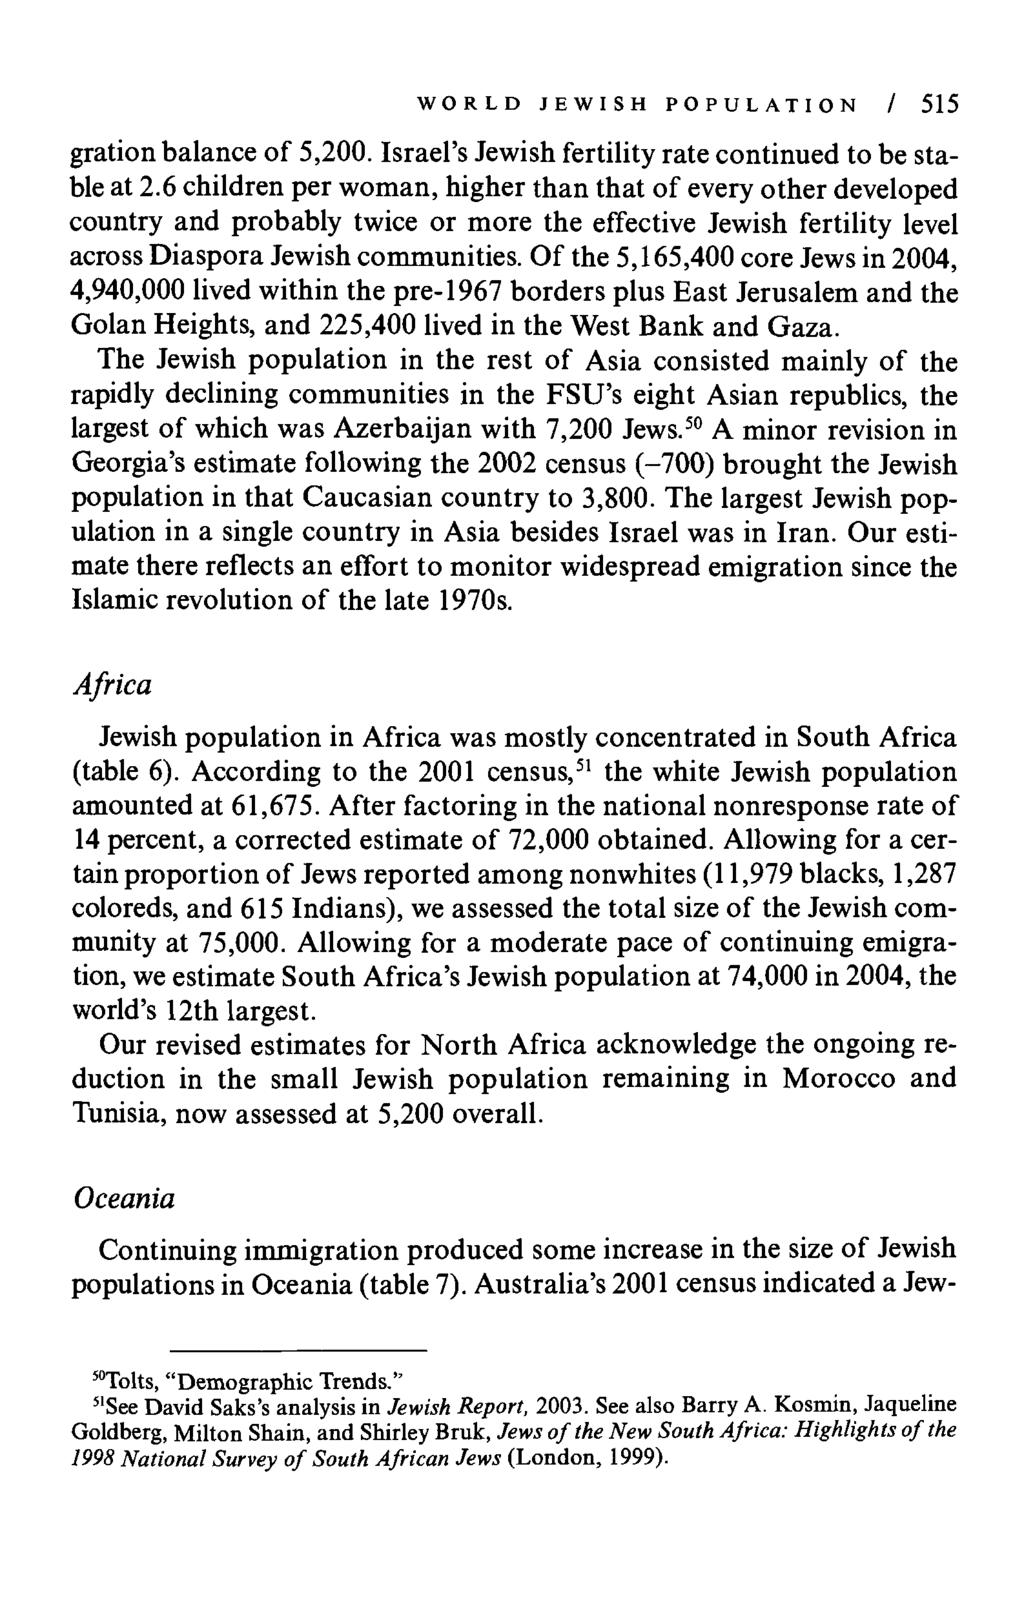 WORLD JEWISH POPULATION / 515 gration balance of 5,200. Israel's Jewish fertility rate continued to be stable at 2.